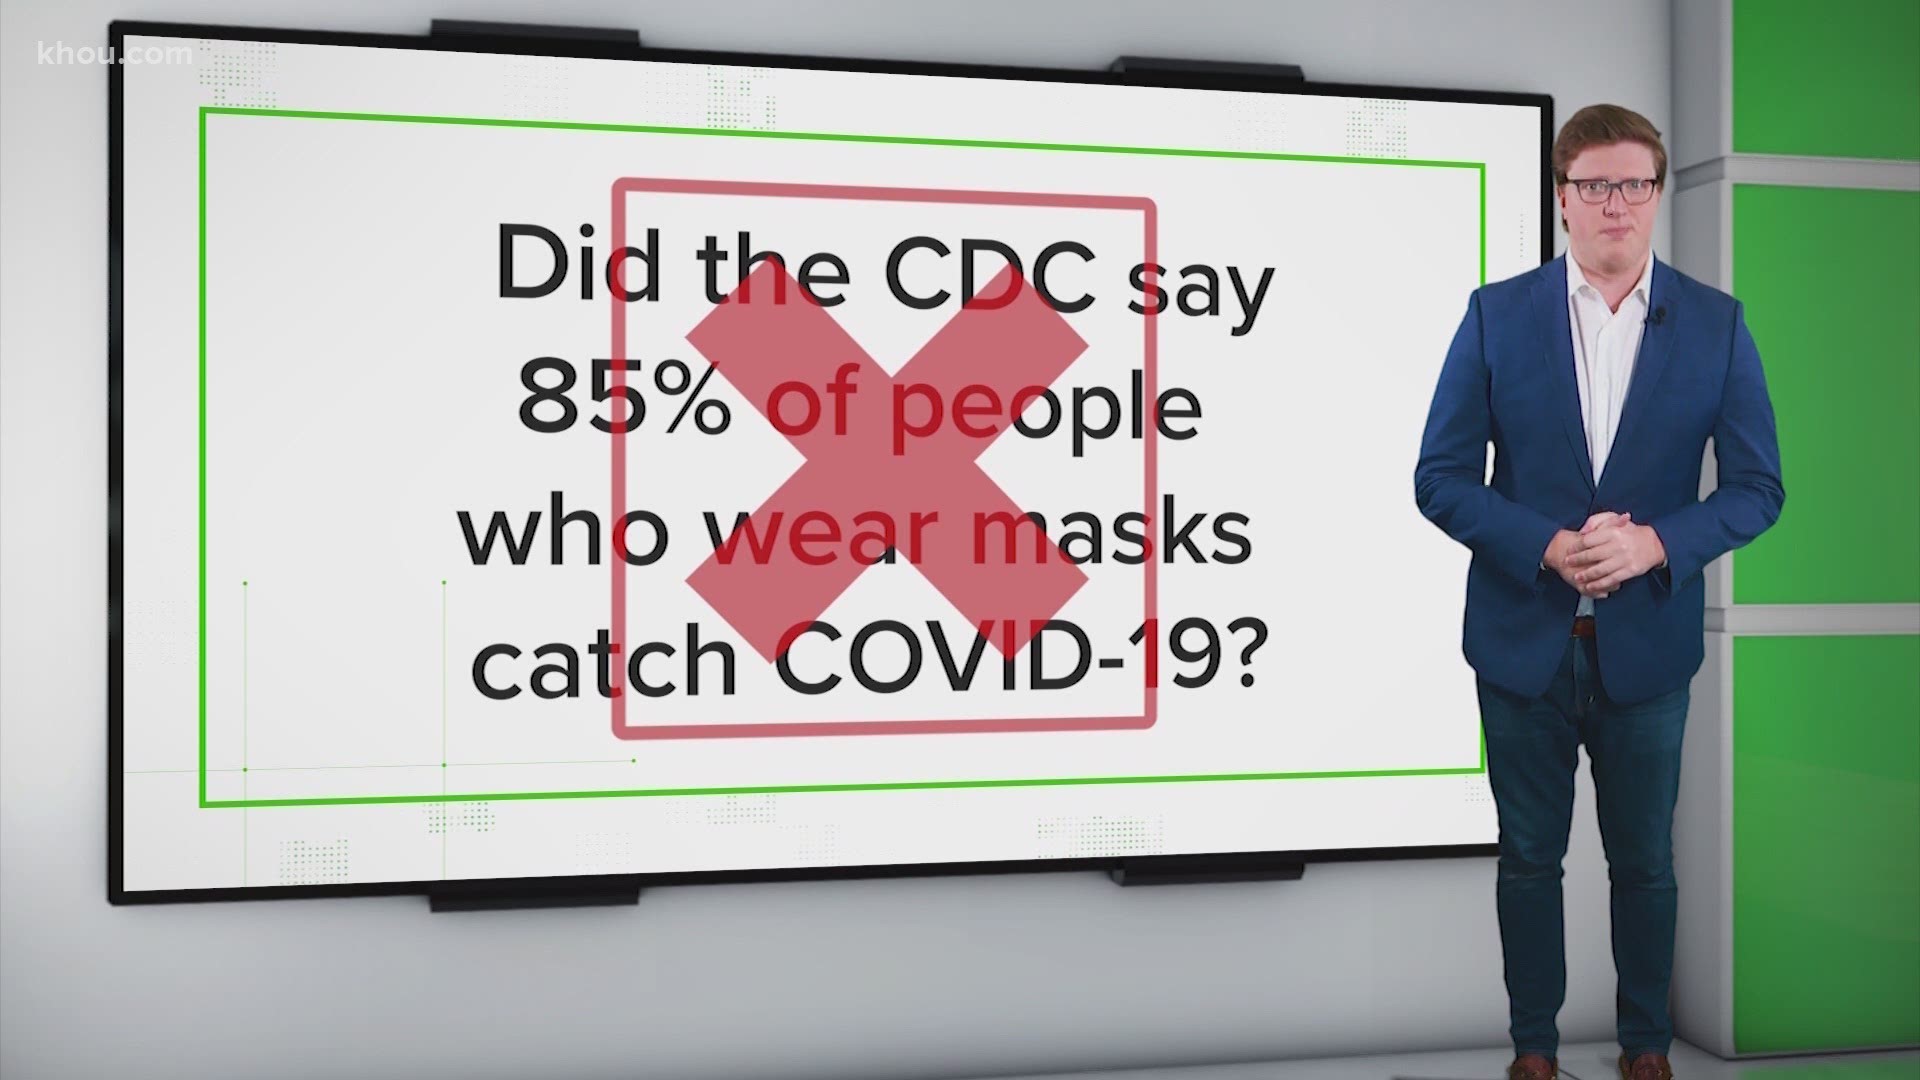 The claim misrepresents a recent study and the CDC's official stance on wearing masks.